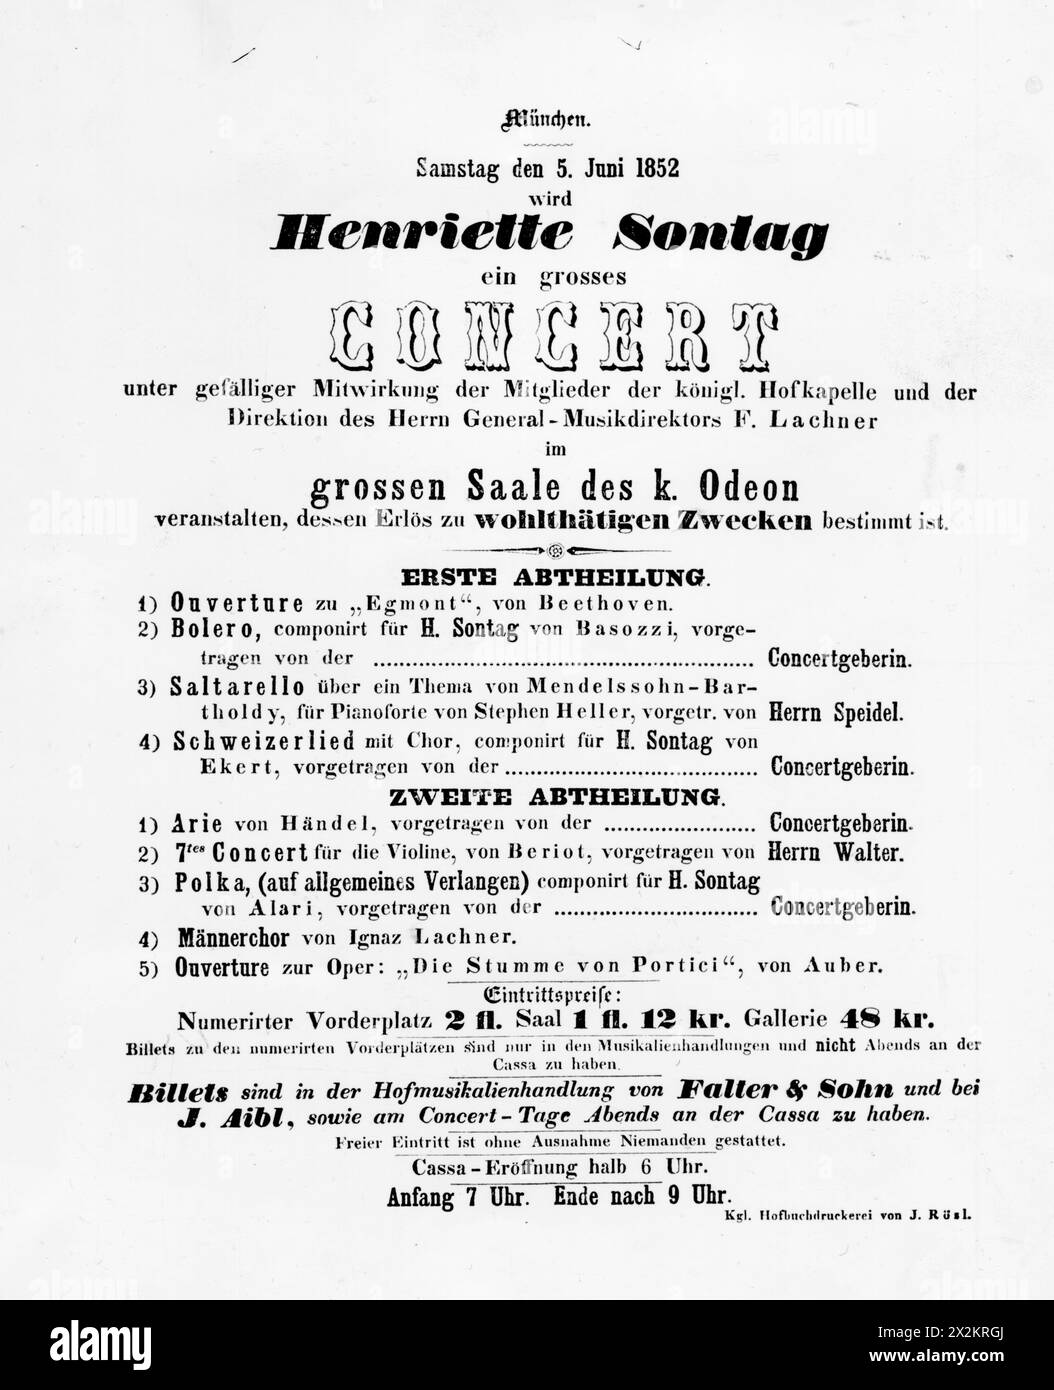 Sontag, Henriette, 3.1.1806 - 17.6.1854, German opera singer (soprano), poster, ADDITIONAL-RIGHTS-CLEARANCE-INFO-NOT-AVAILABLE Stock Photo